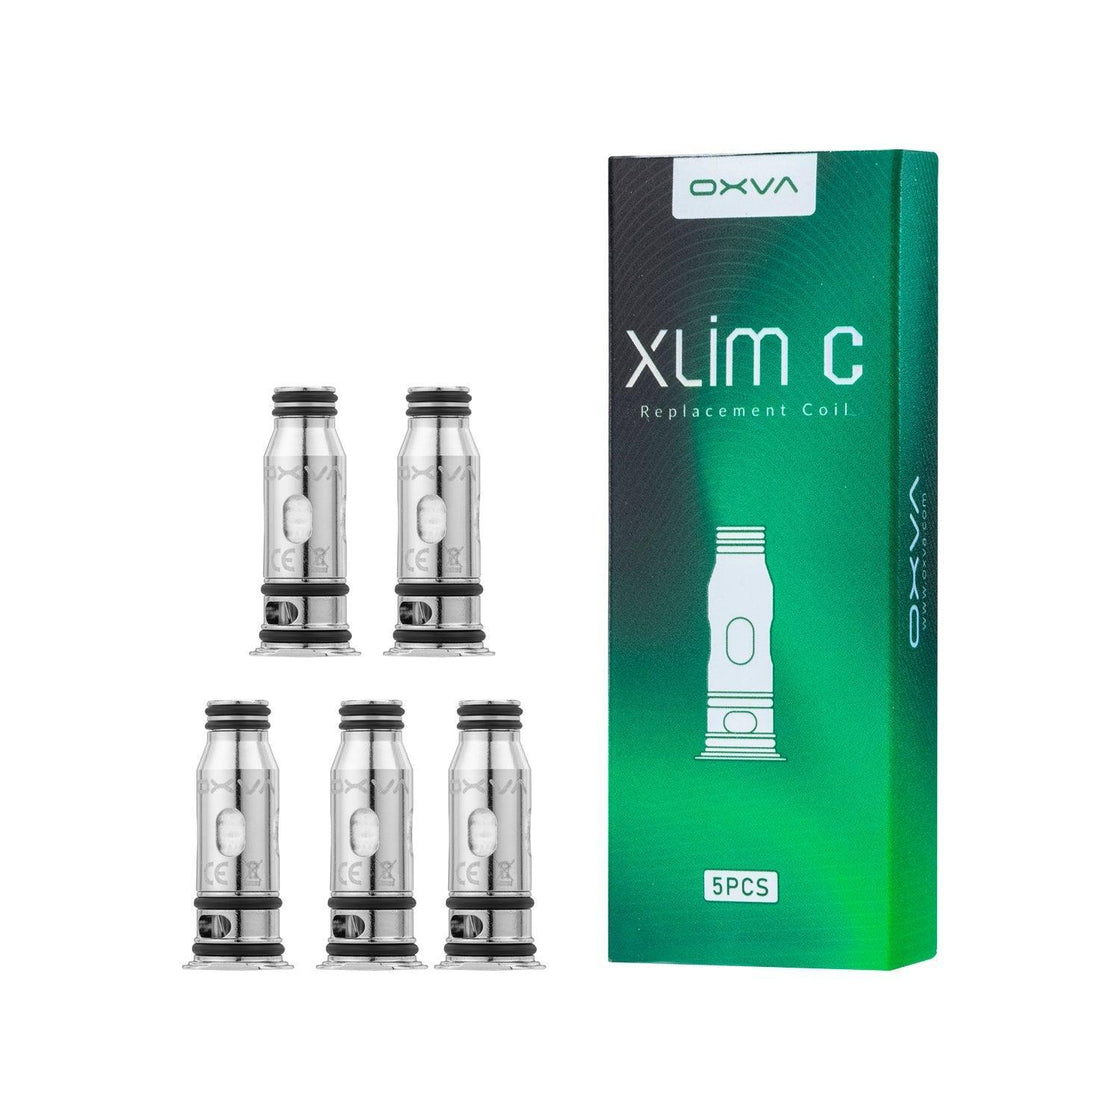 OXVA XLIM C REPLACEMENT COIL - PACK OF 5 - Vapeslough